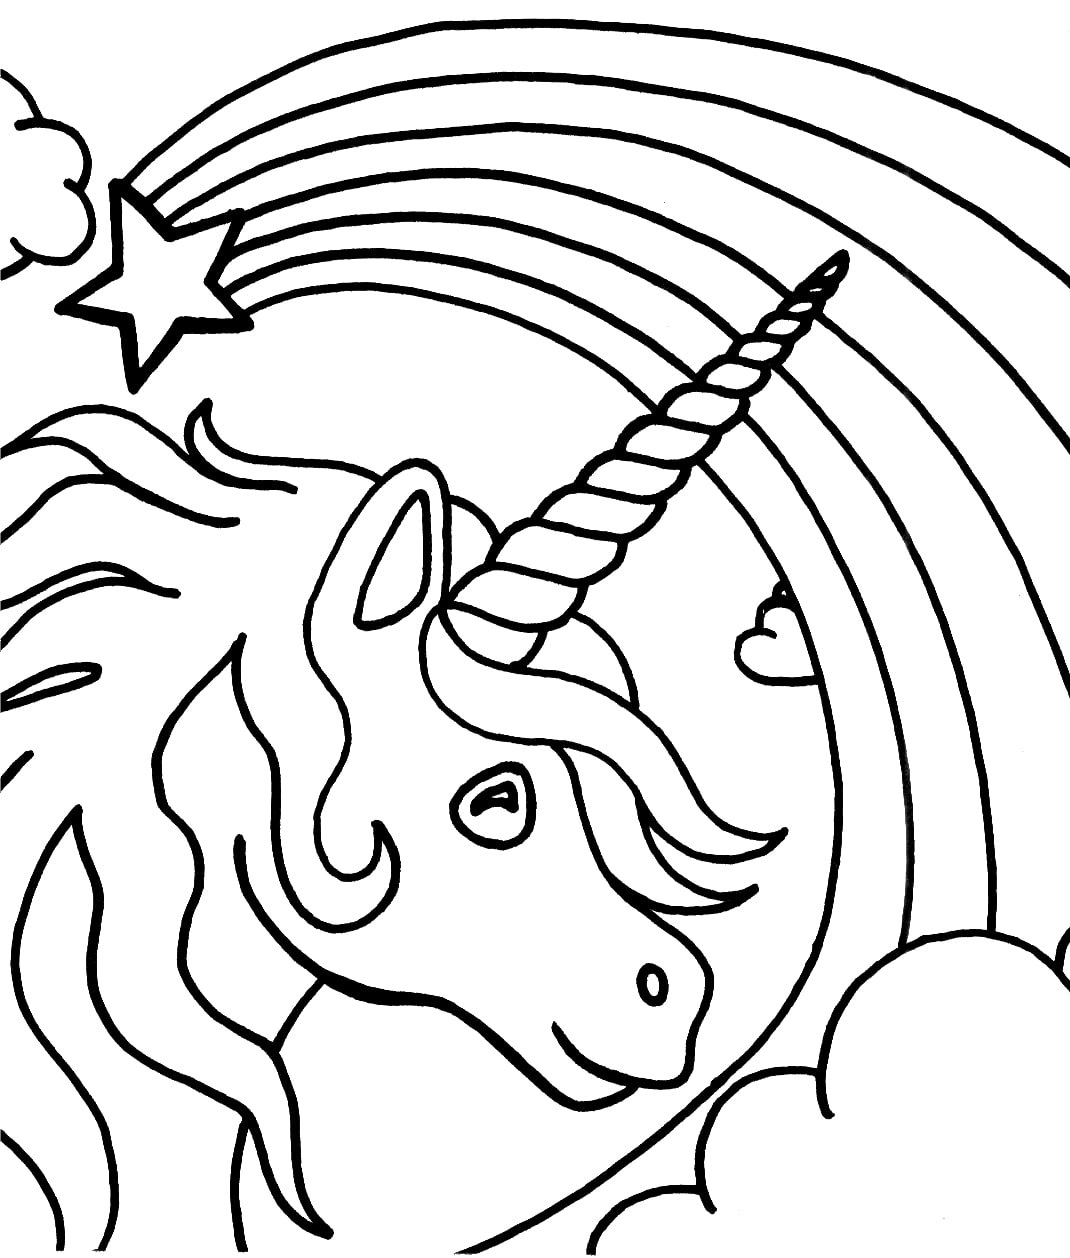 Unicorn Head With Rainbow Coloring Page   Free Printable Coloring ...